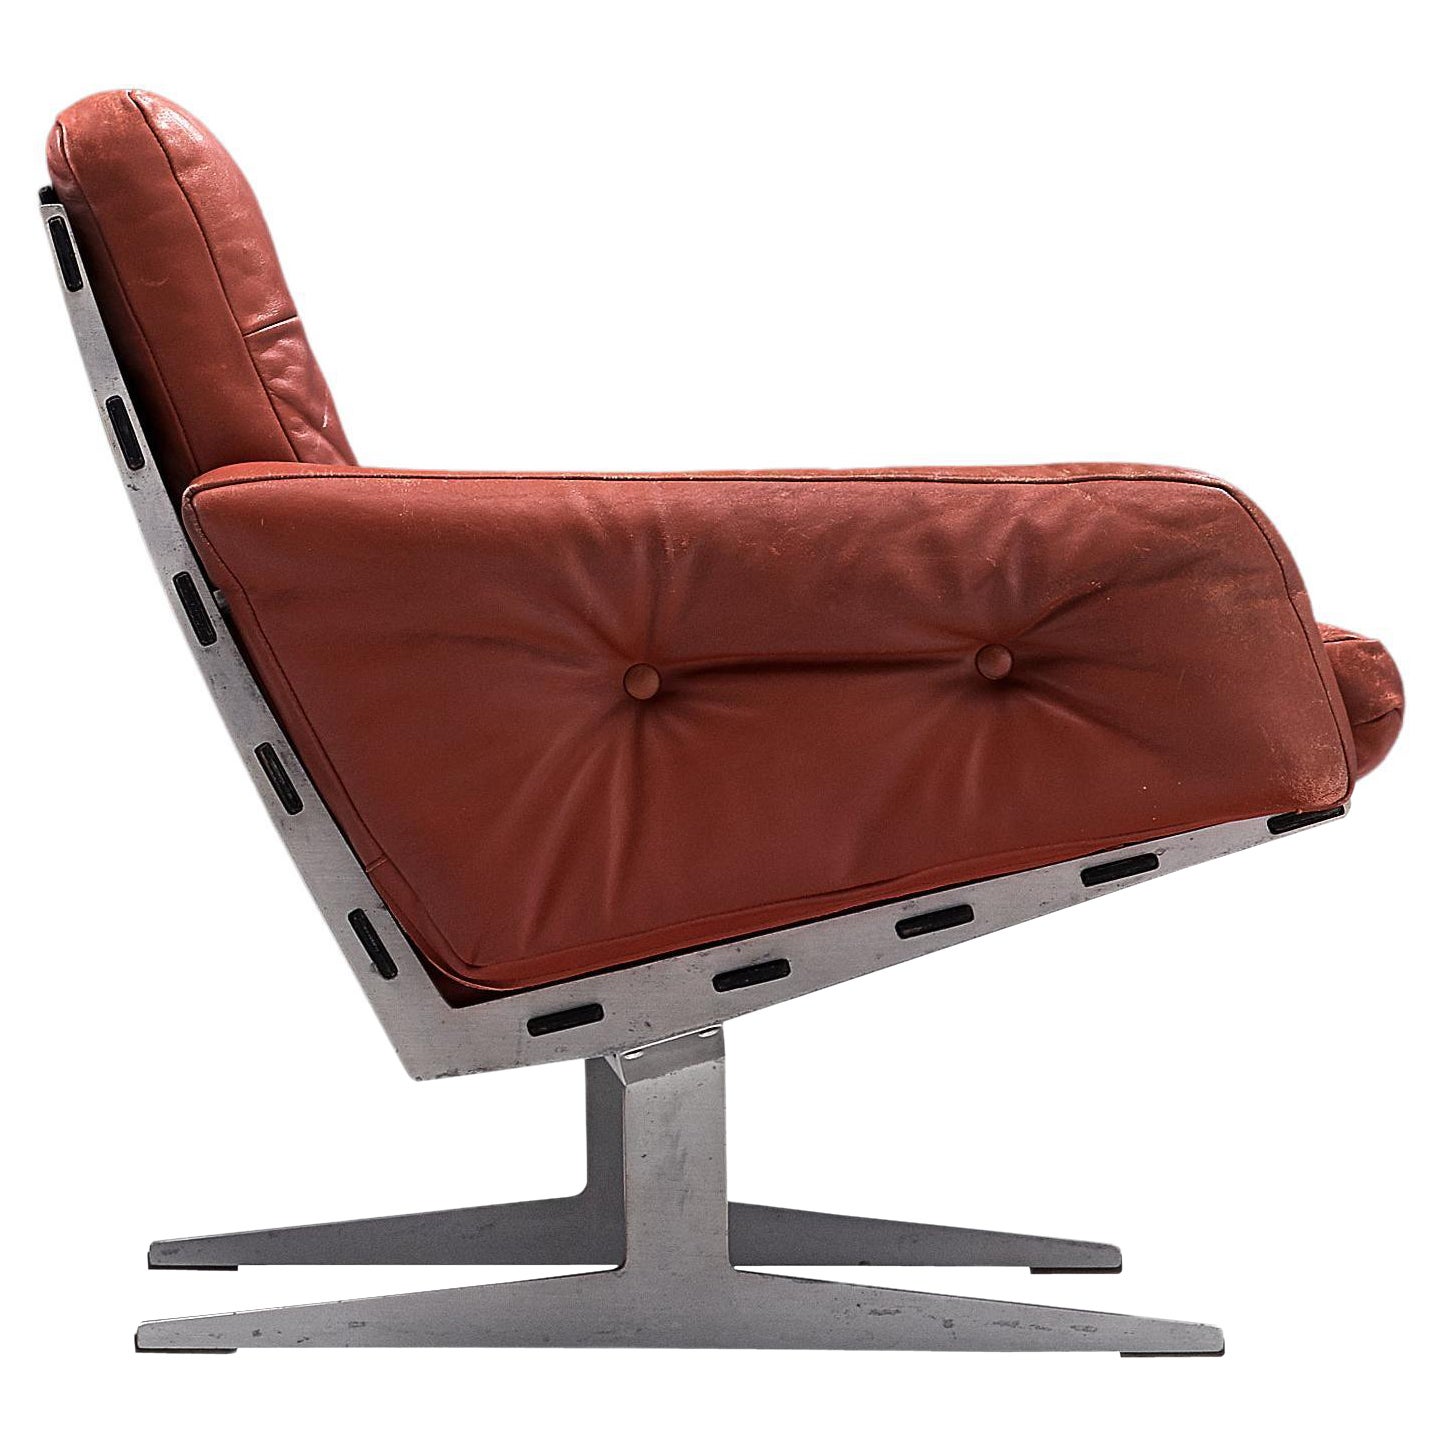 Paul Leidersdorff for Cardo 'Caravelle' Lounge Chair in Red Leather